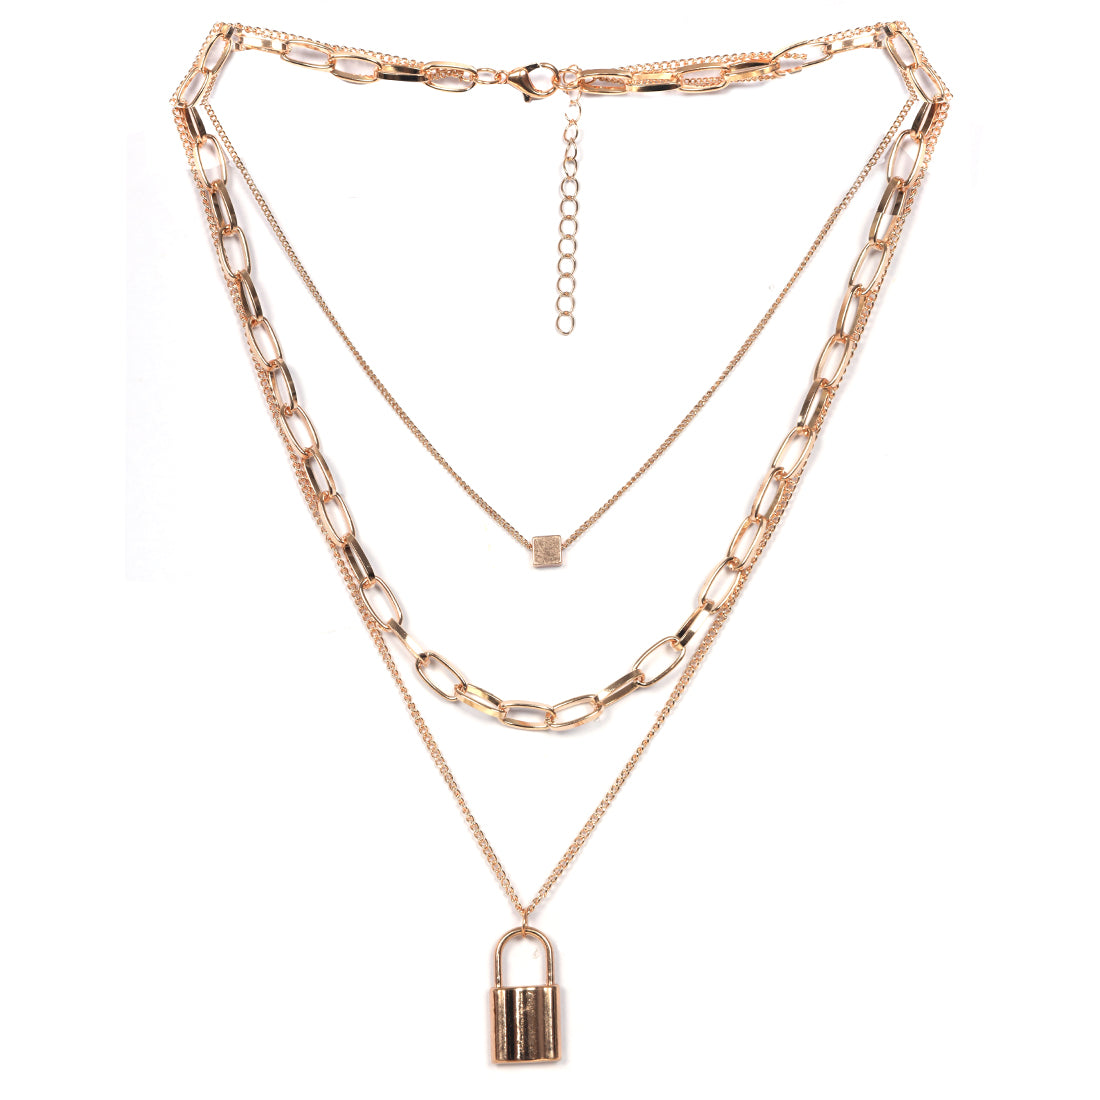 LOCK & SQUARE PENDANT CHAIN-LINK STATEMENT GOLD-TONED LAYERED NECKLACE